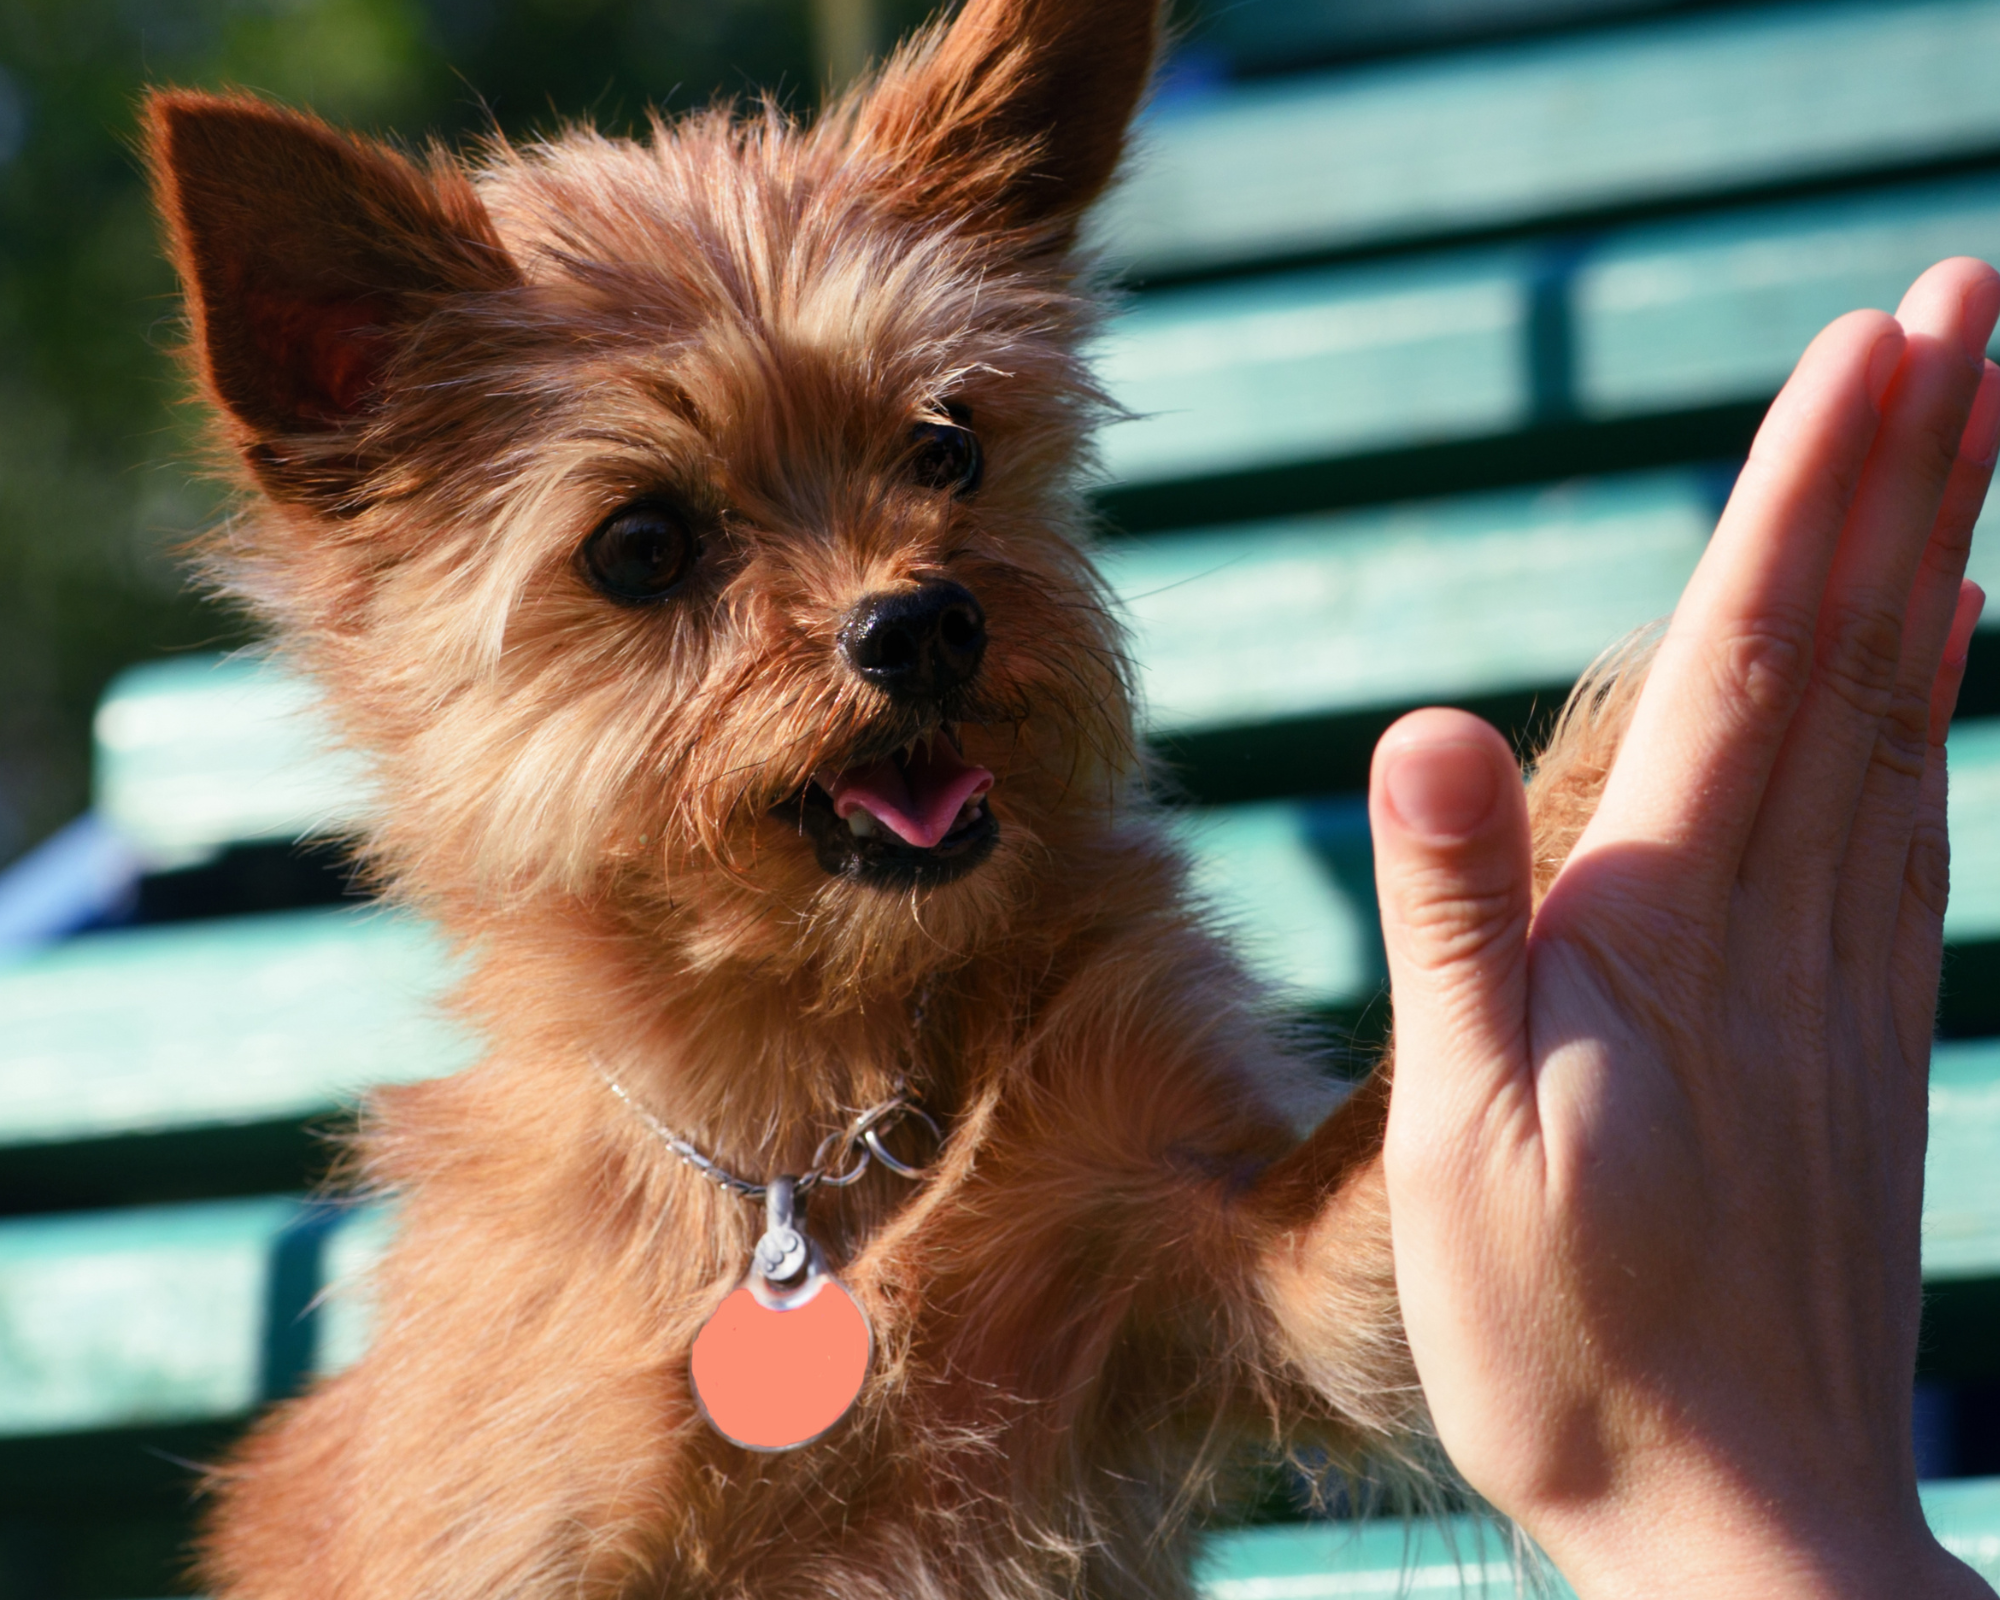 Small brown terrier giving high five to human hand